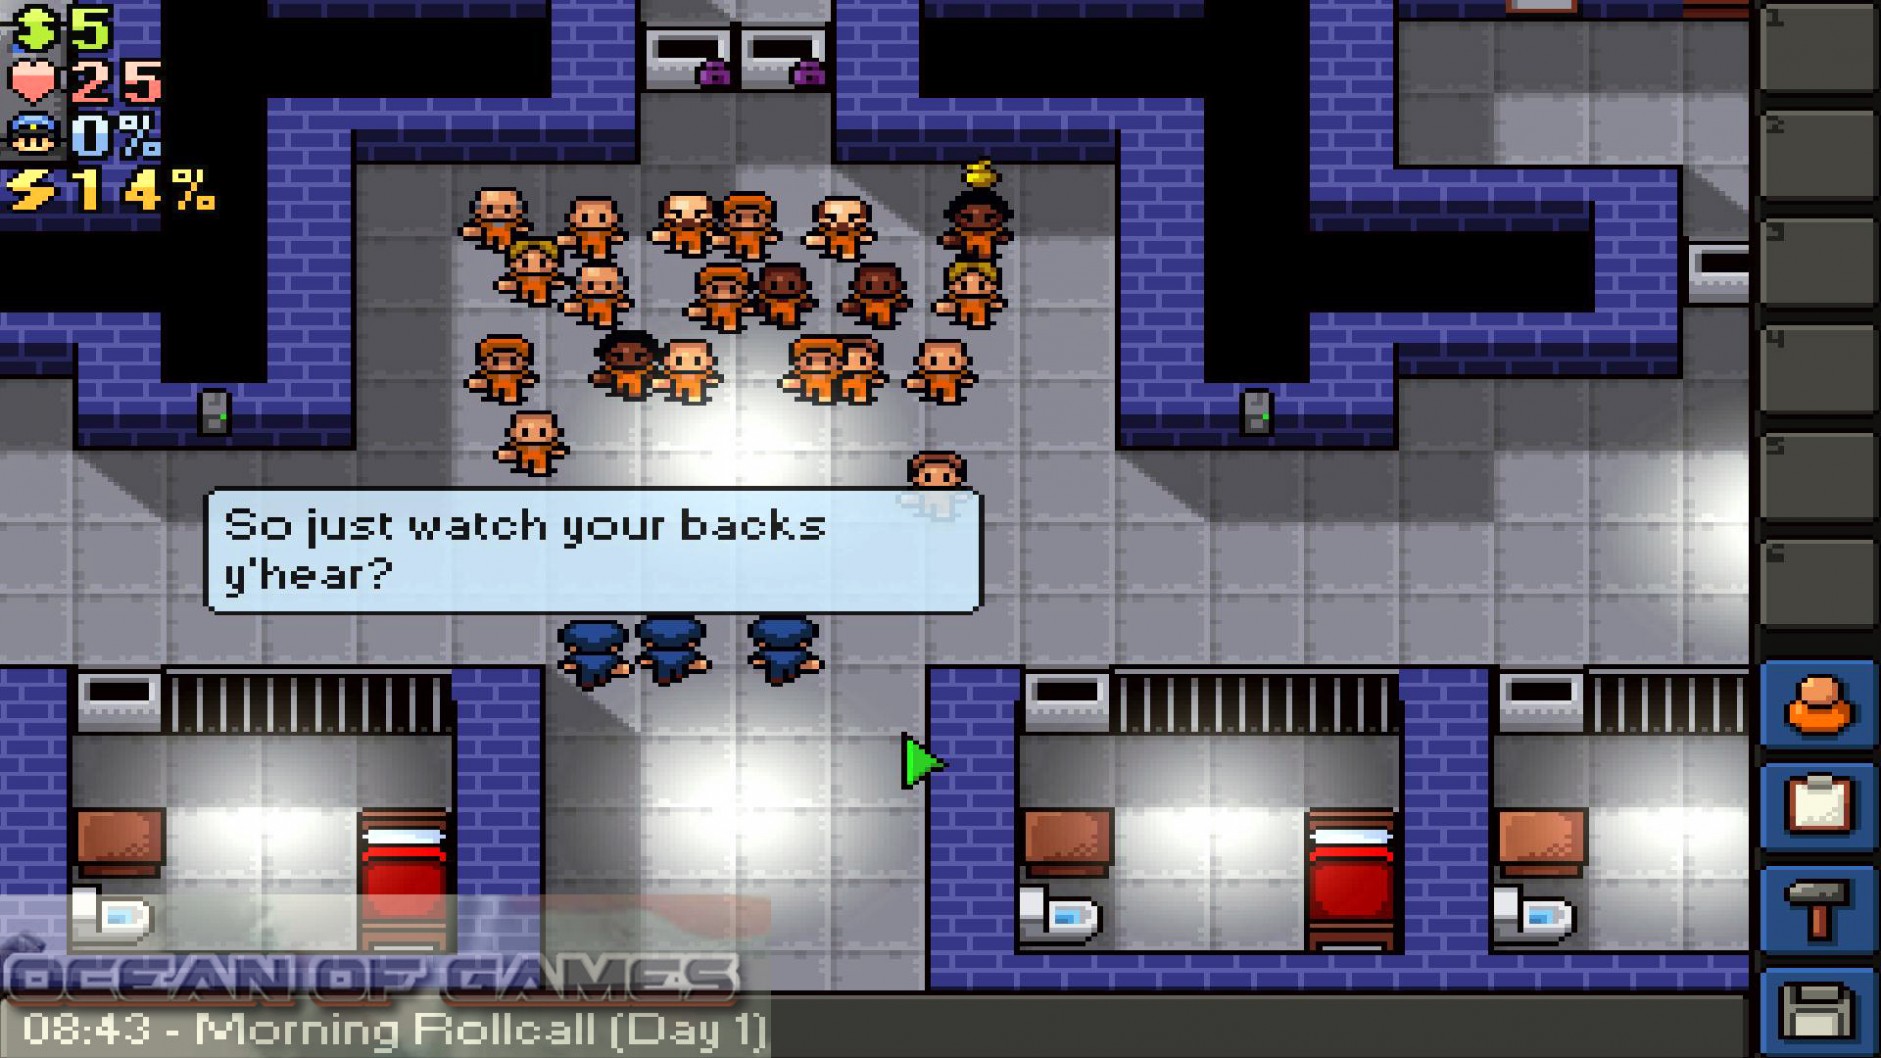 the escapists free download